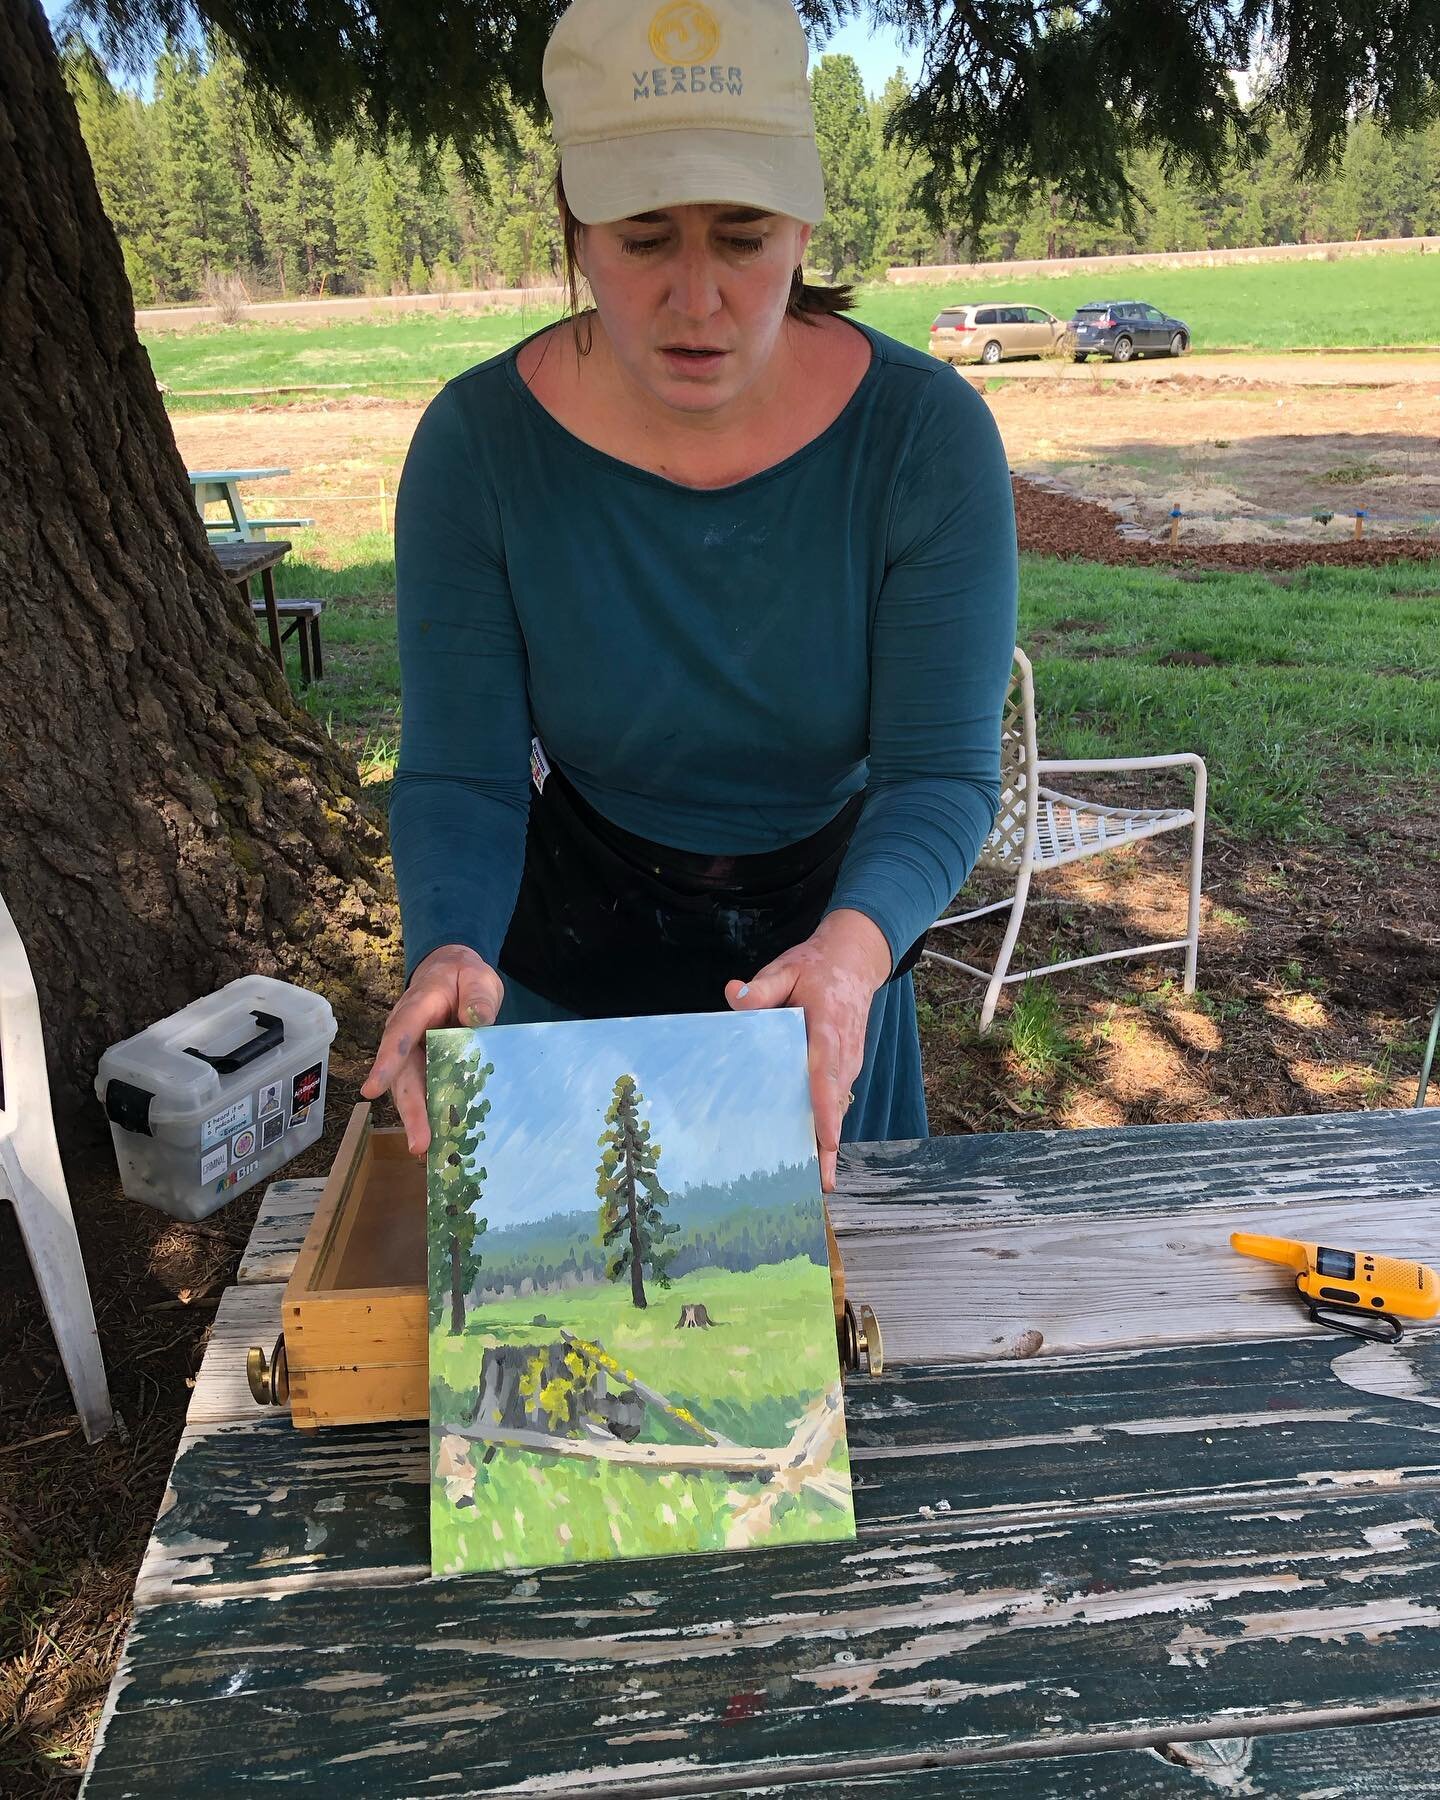 Plein air painting vibes ✨ abound

Artists are telling the story of the land renewed, the beauty, the relationships. These paint out events are free and open to everyone. 

Thanks to @sarahfburns for organizing another great event! We look forward to